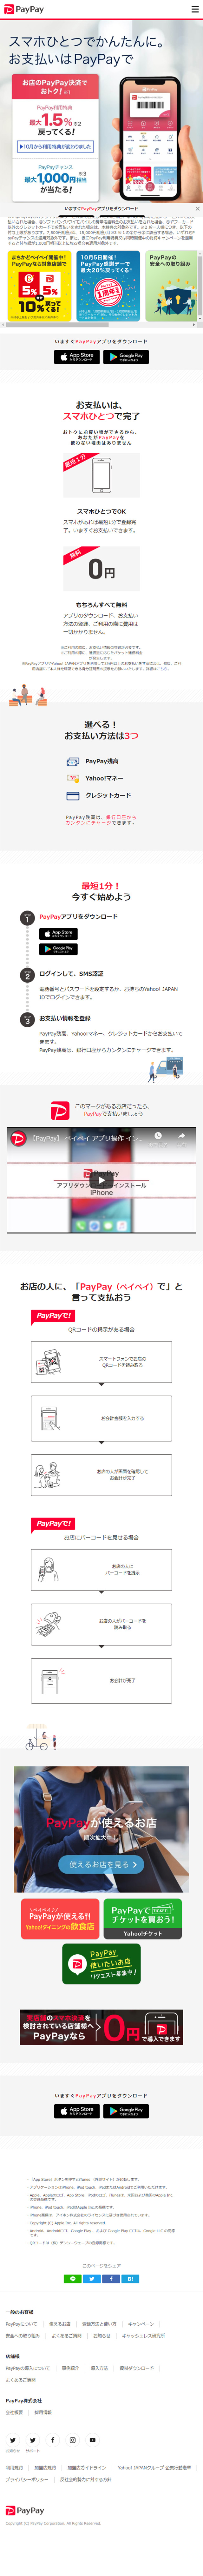 PayPay_sp_1